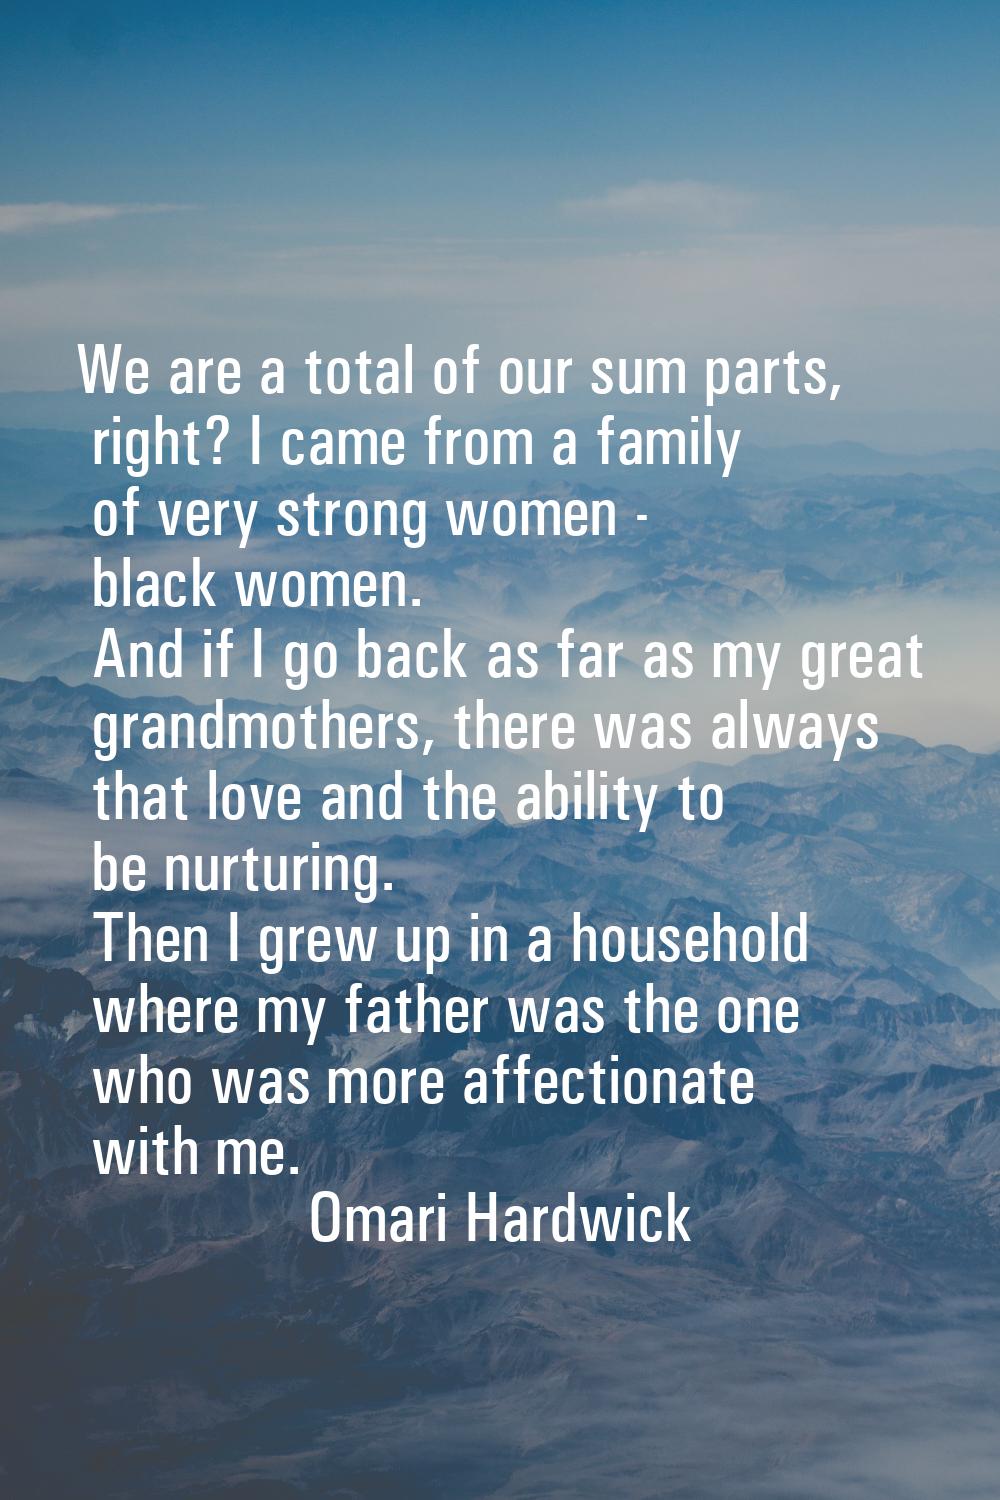 We are a total of our sum parts, right? I came from a family of very strong women - black women. An